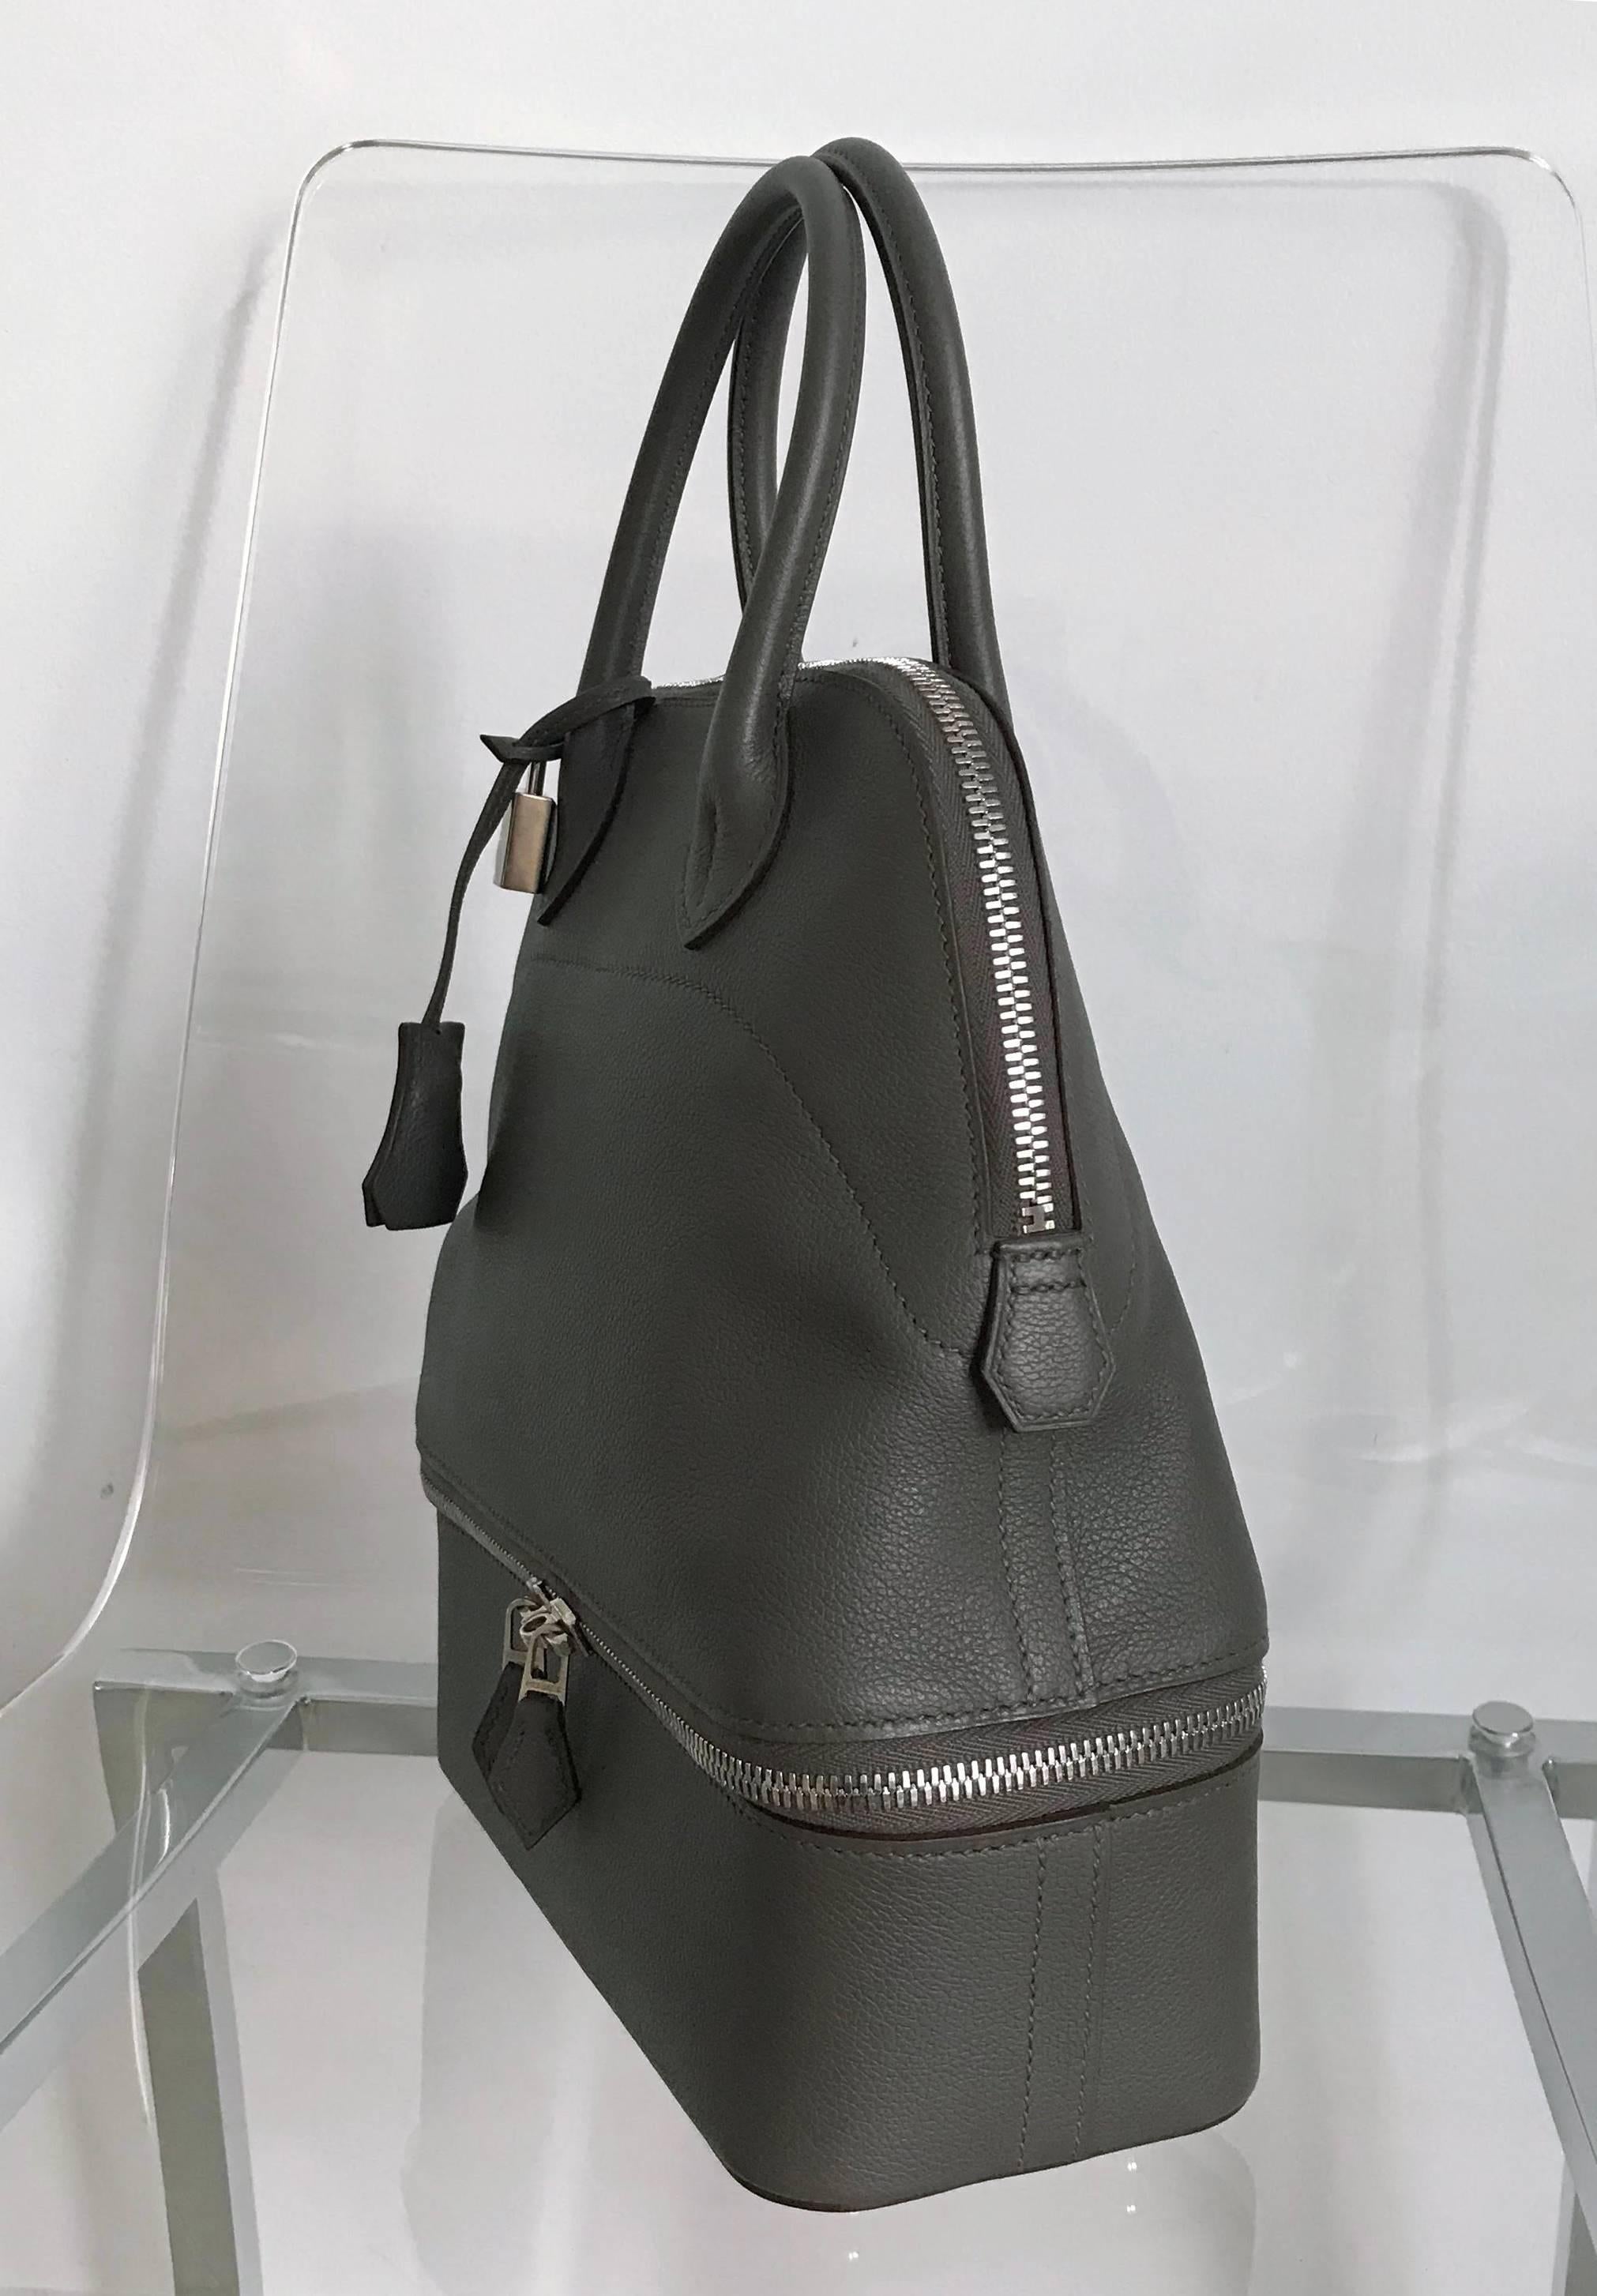 Hermes Sac Bolide Secret PM Etain Veau Evercolor In Excellent Condition For Sale In Toronto, ON